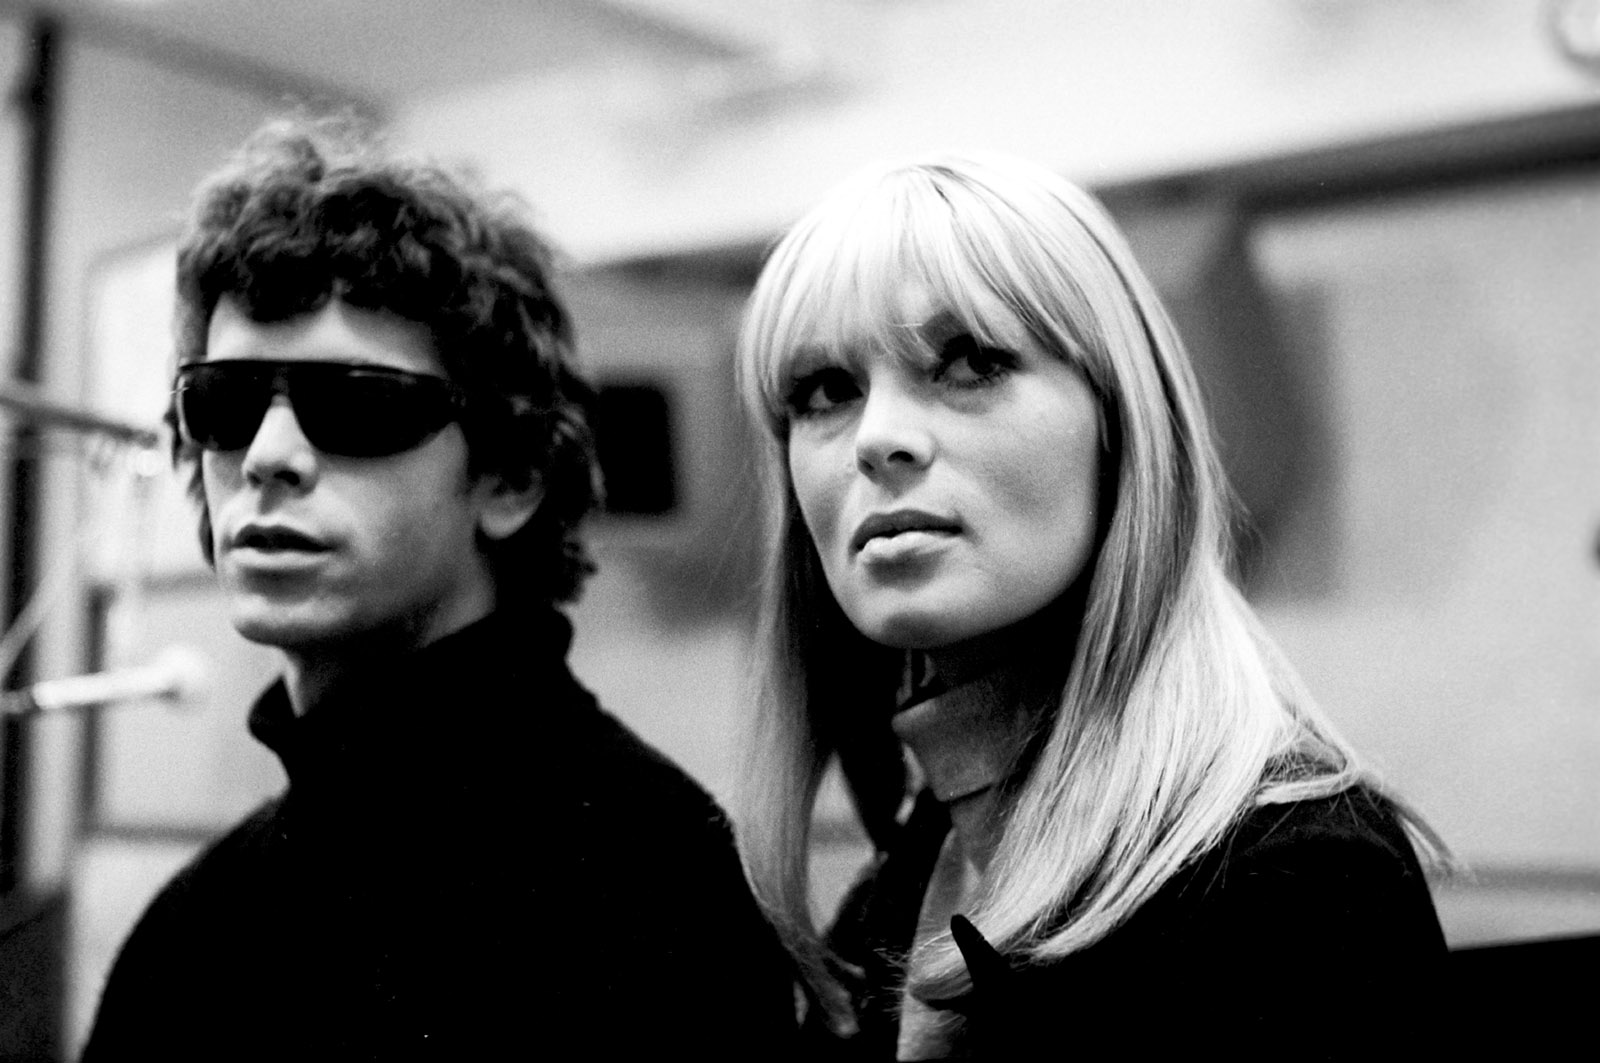 Lou Reed and Nico at Scepter Studios during the recording of the Velvet Underground’s first album, New York City, 1966